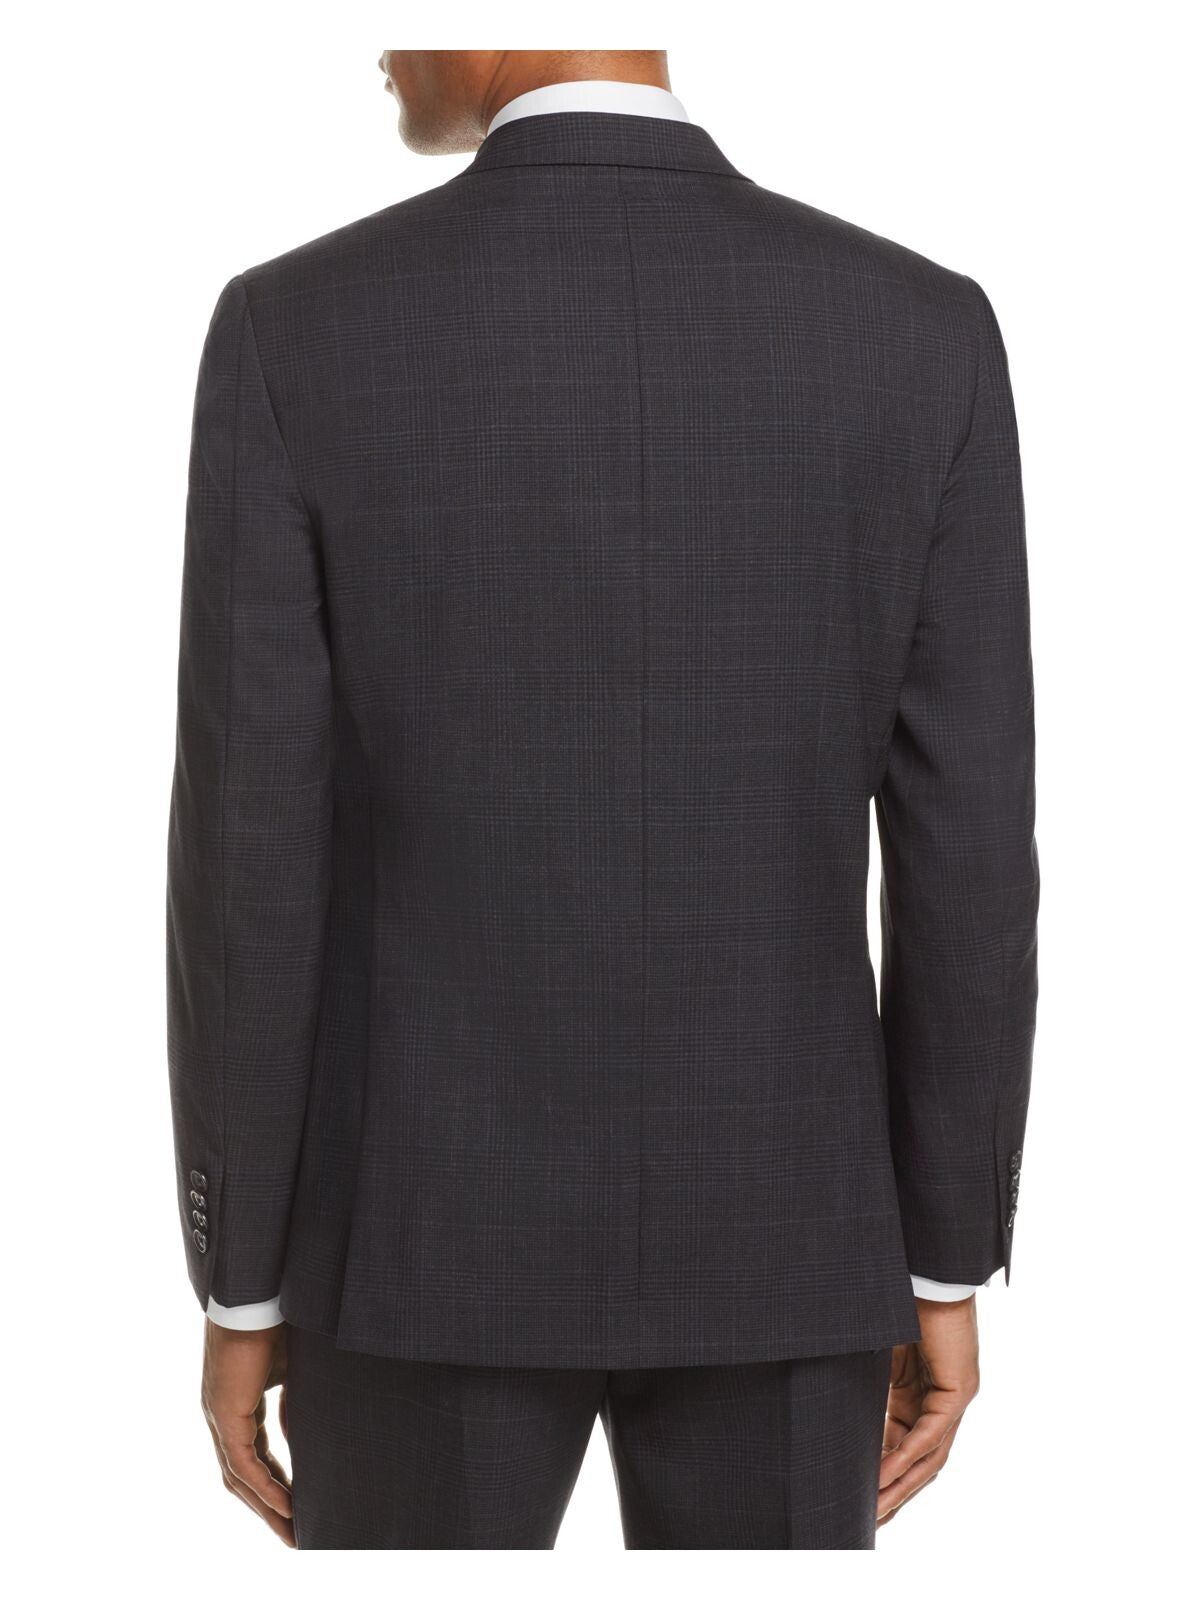 MICHAEL KORS Mens Gray Single Breasted, Stretch, Windowpane Plaid Classic Fit Stretch Suit Separate Blazer Jacket 38S